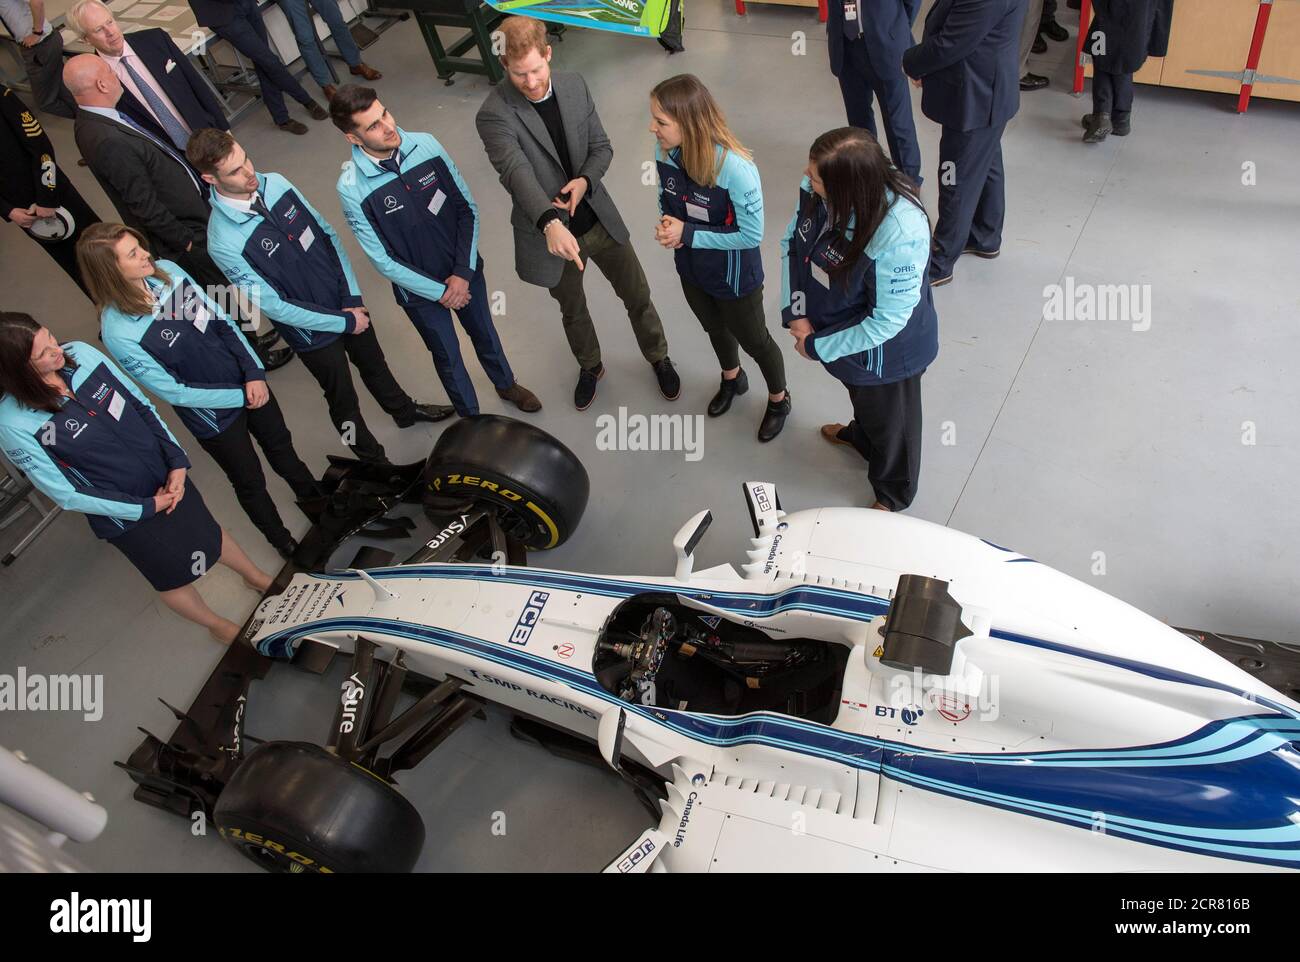 Britain's Prince Harry talks to staff from the Williams Racing team during a visit to the Silverstone University Technical College at Silverstone, Britain, March 7, 2018. REUTERS/Arthur Edwards/Pool Stock Photo